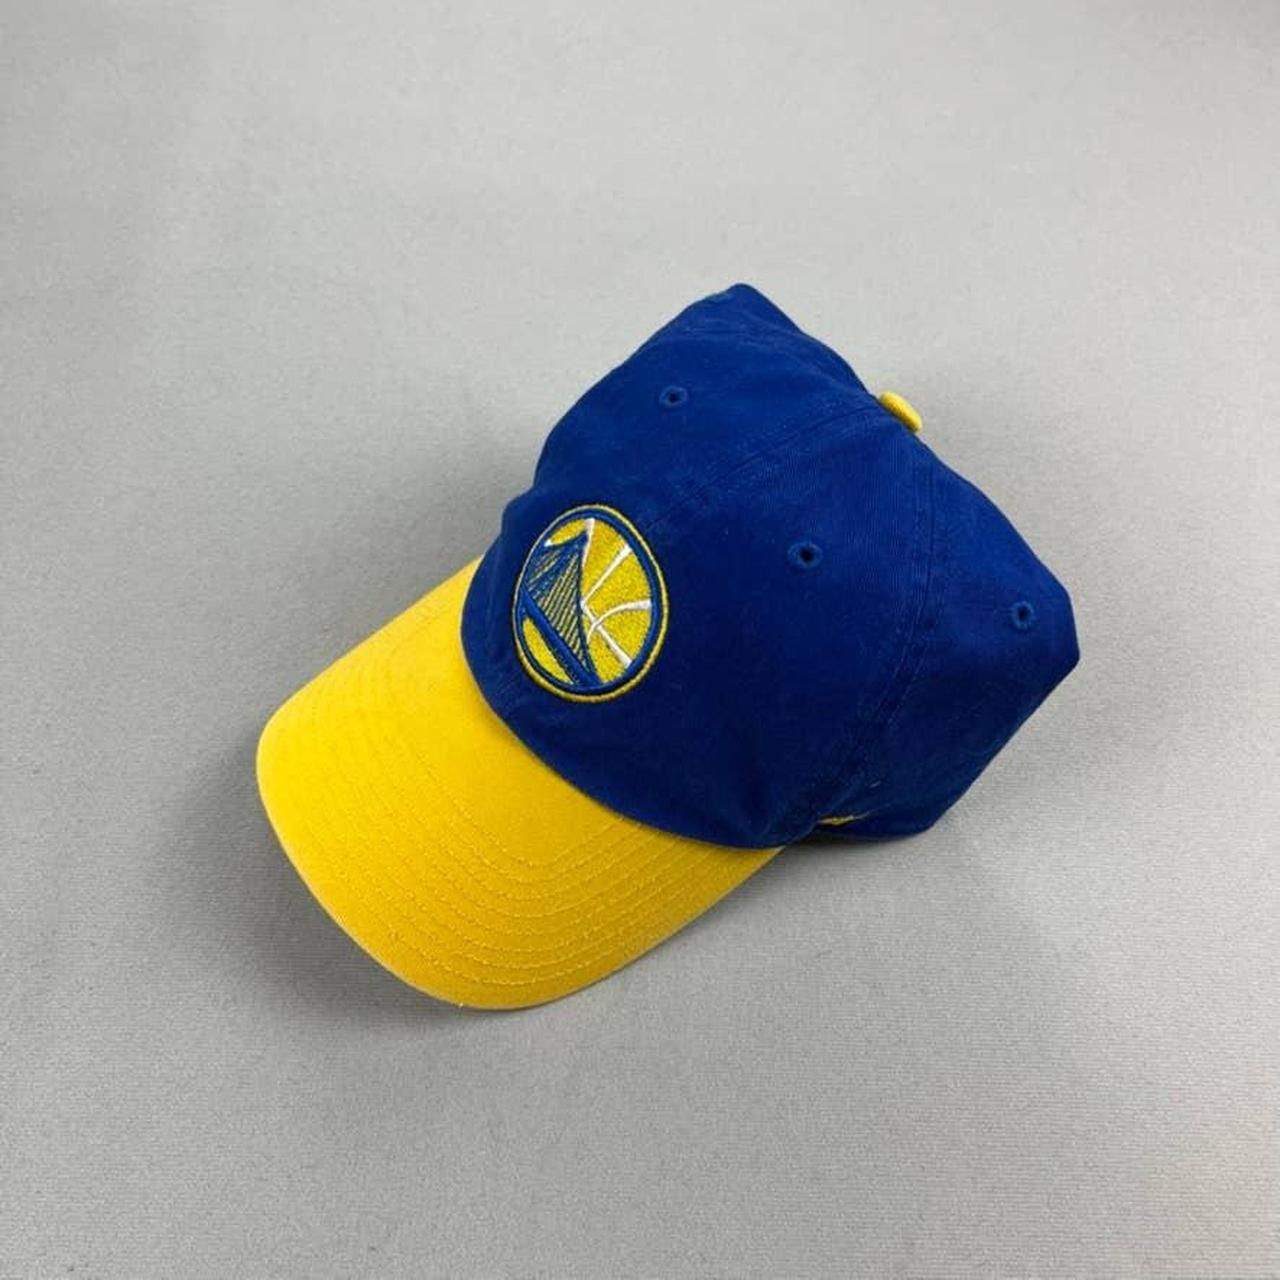 NBA Men's Blue and Yellow Hat